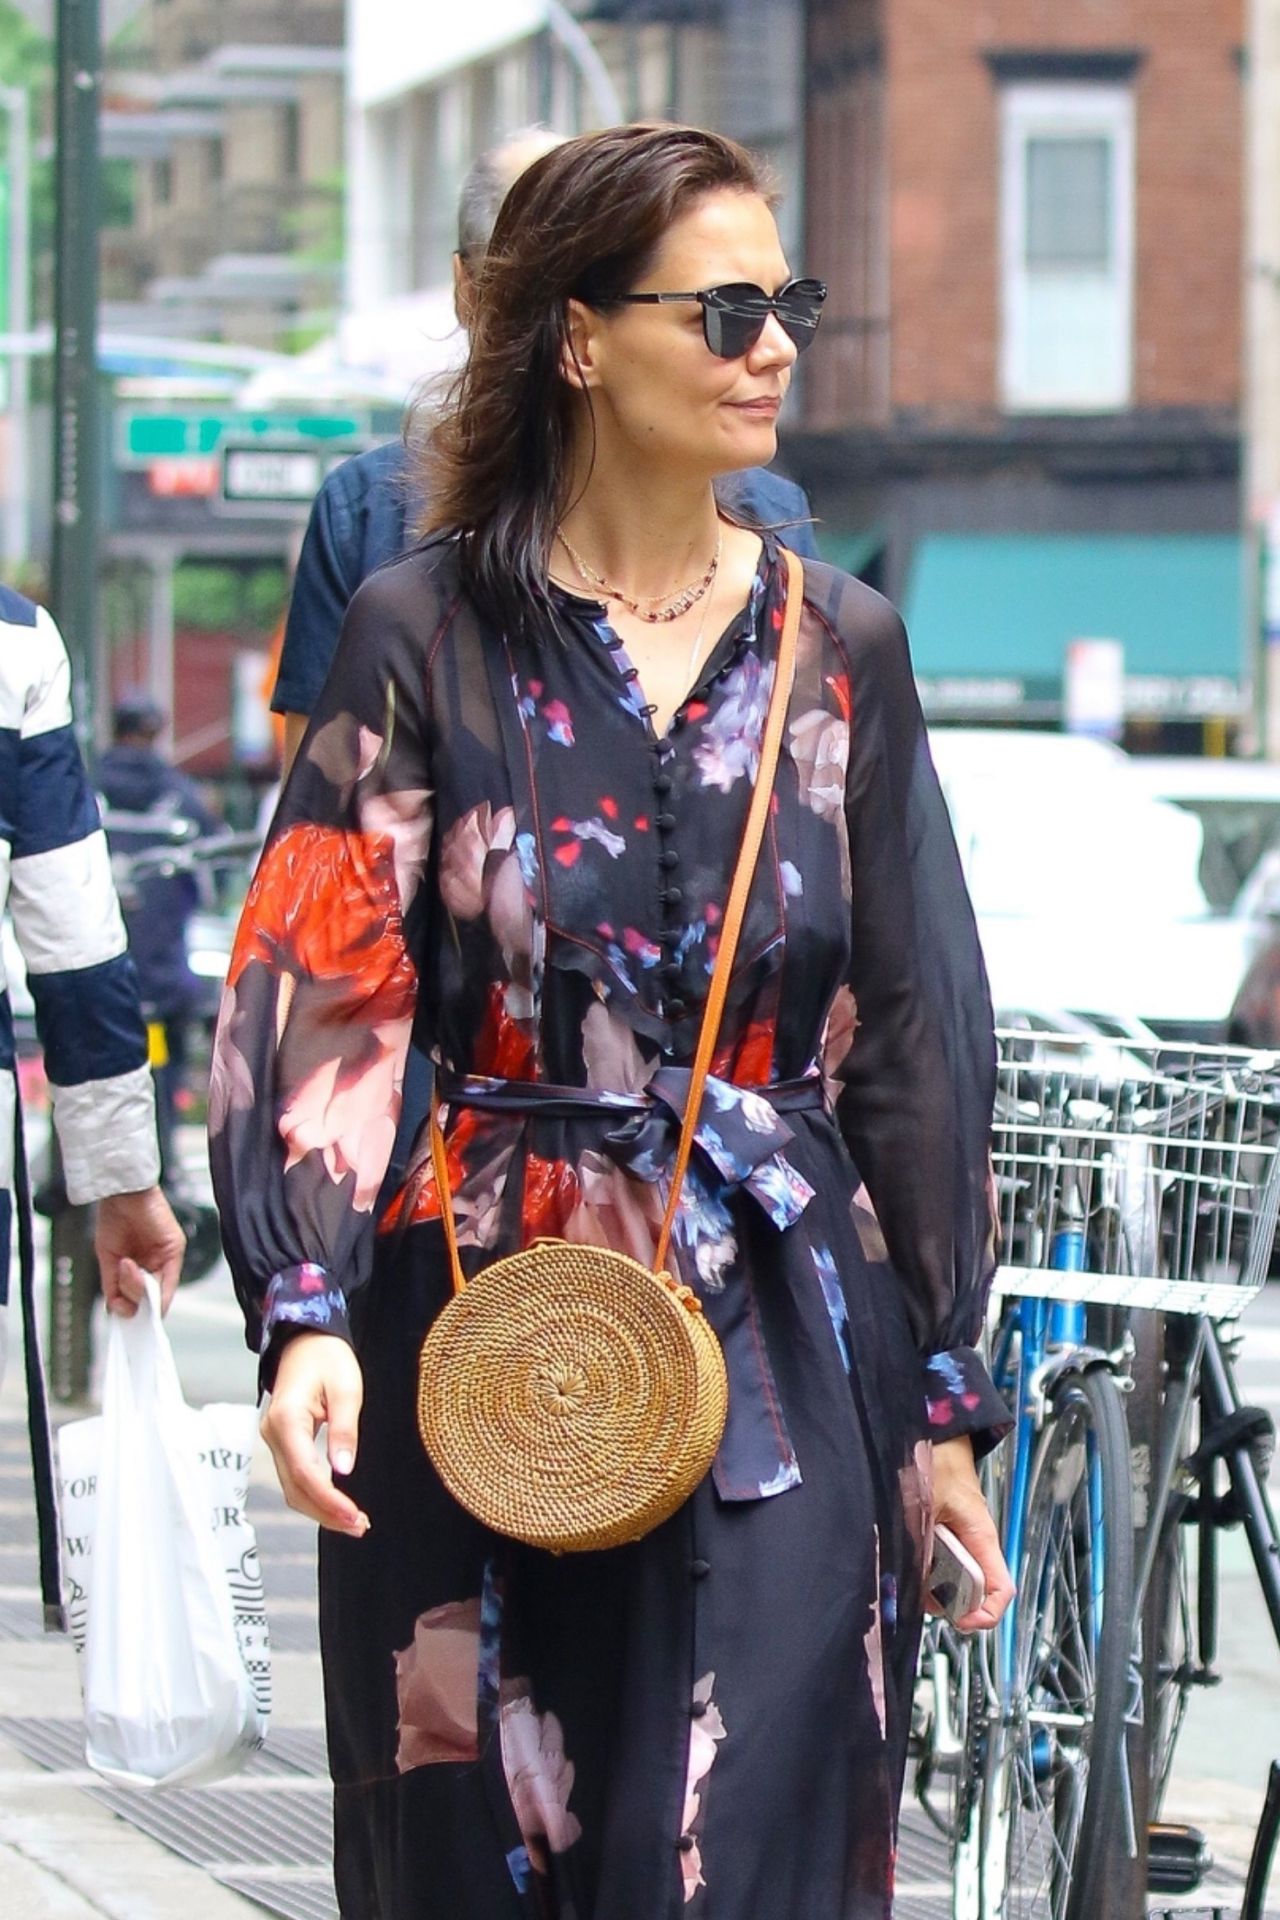 katie-holmes-out-in-nyc-5-28-2019-4.jpg